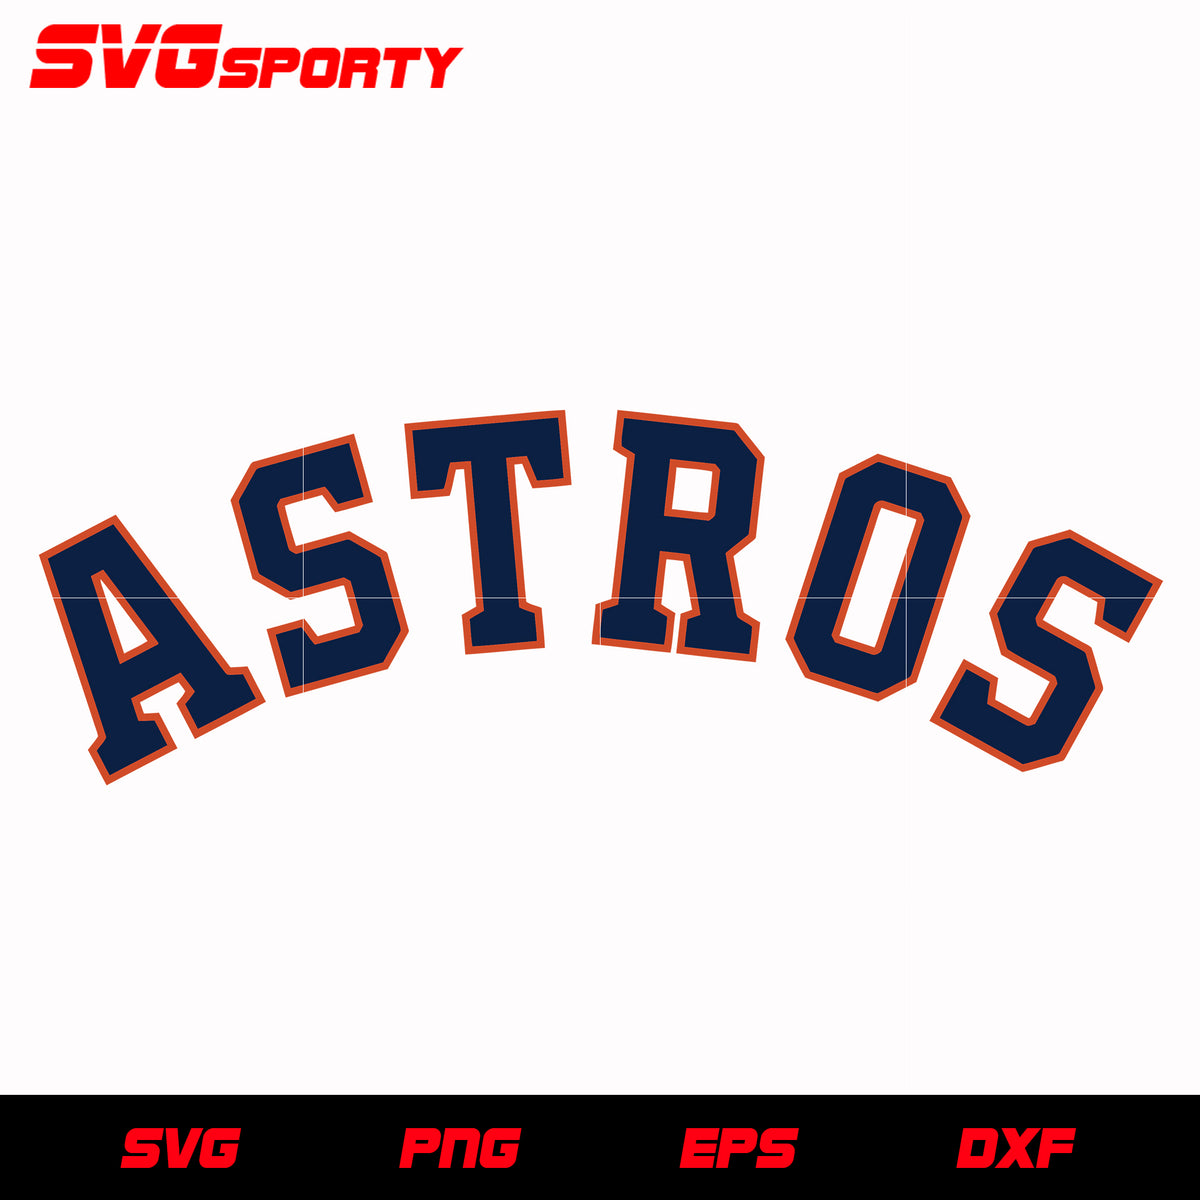 Houston Astros SVG - Free svg download - SVG, PNG cutting files